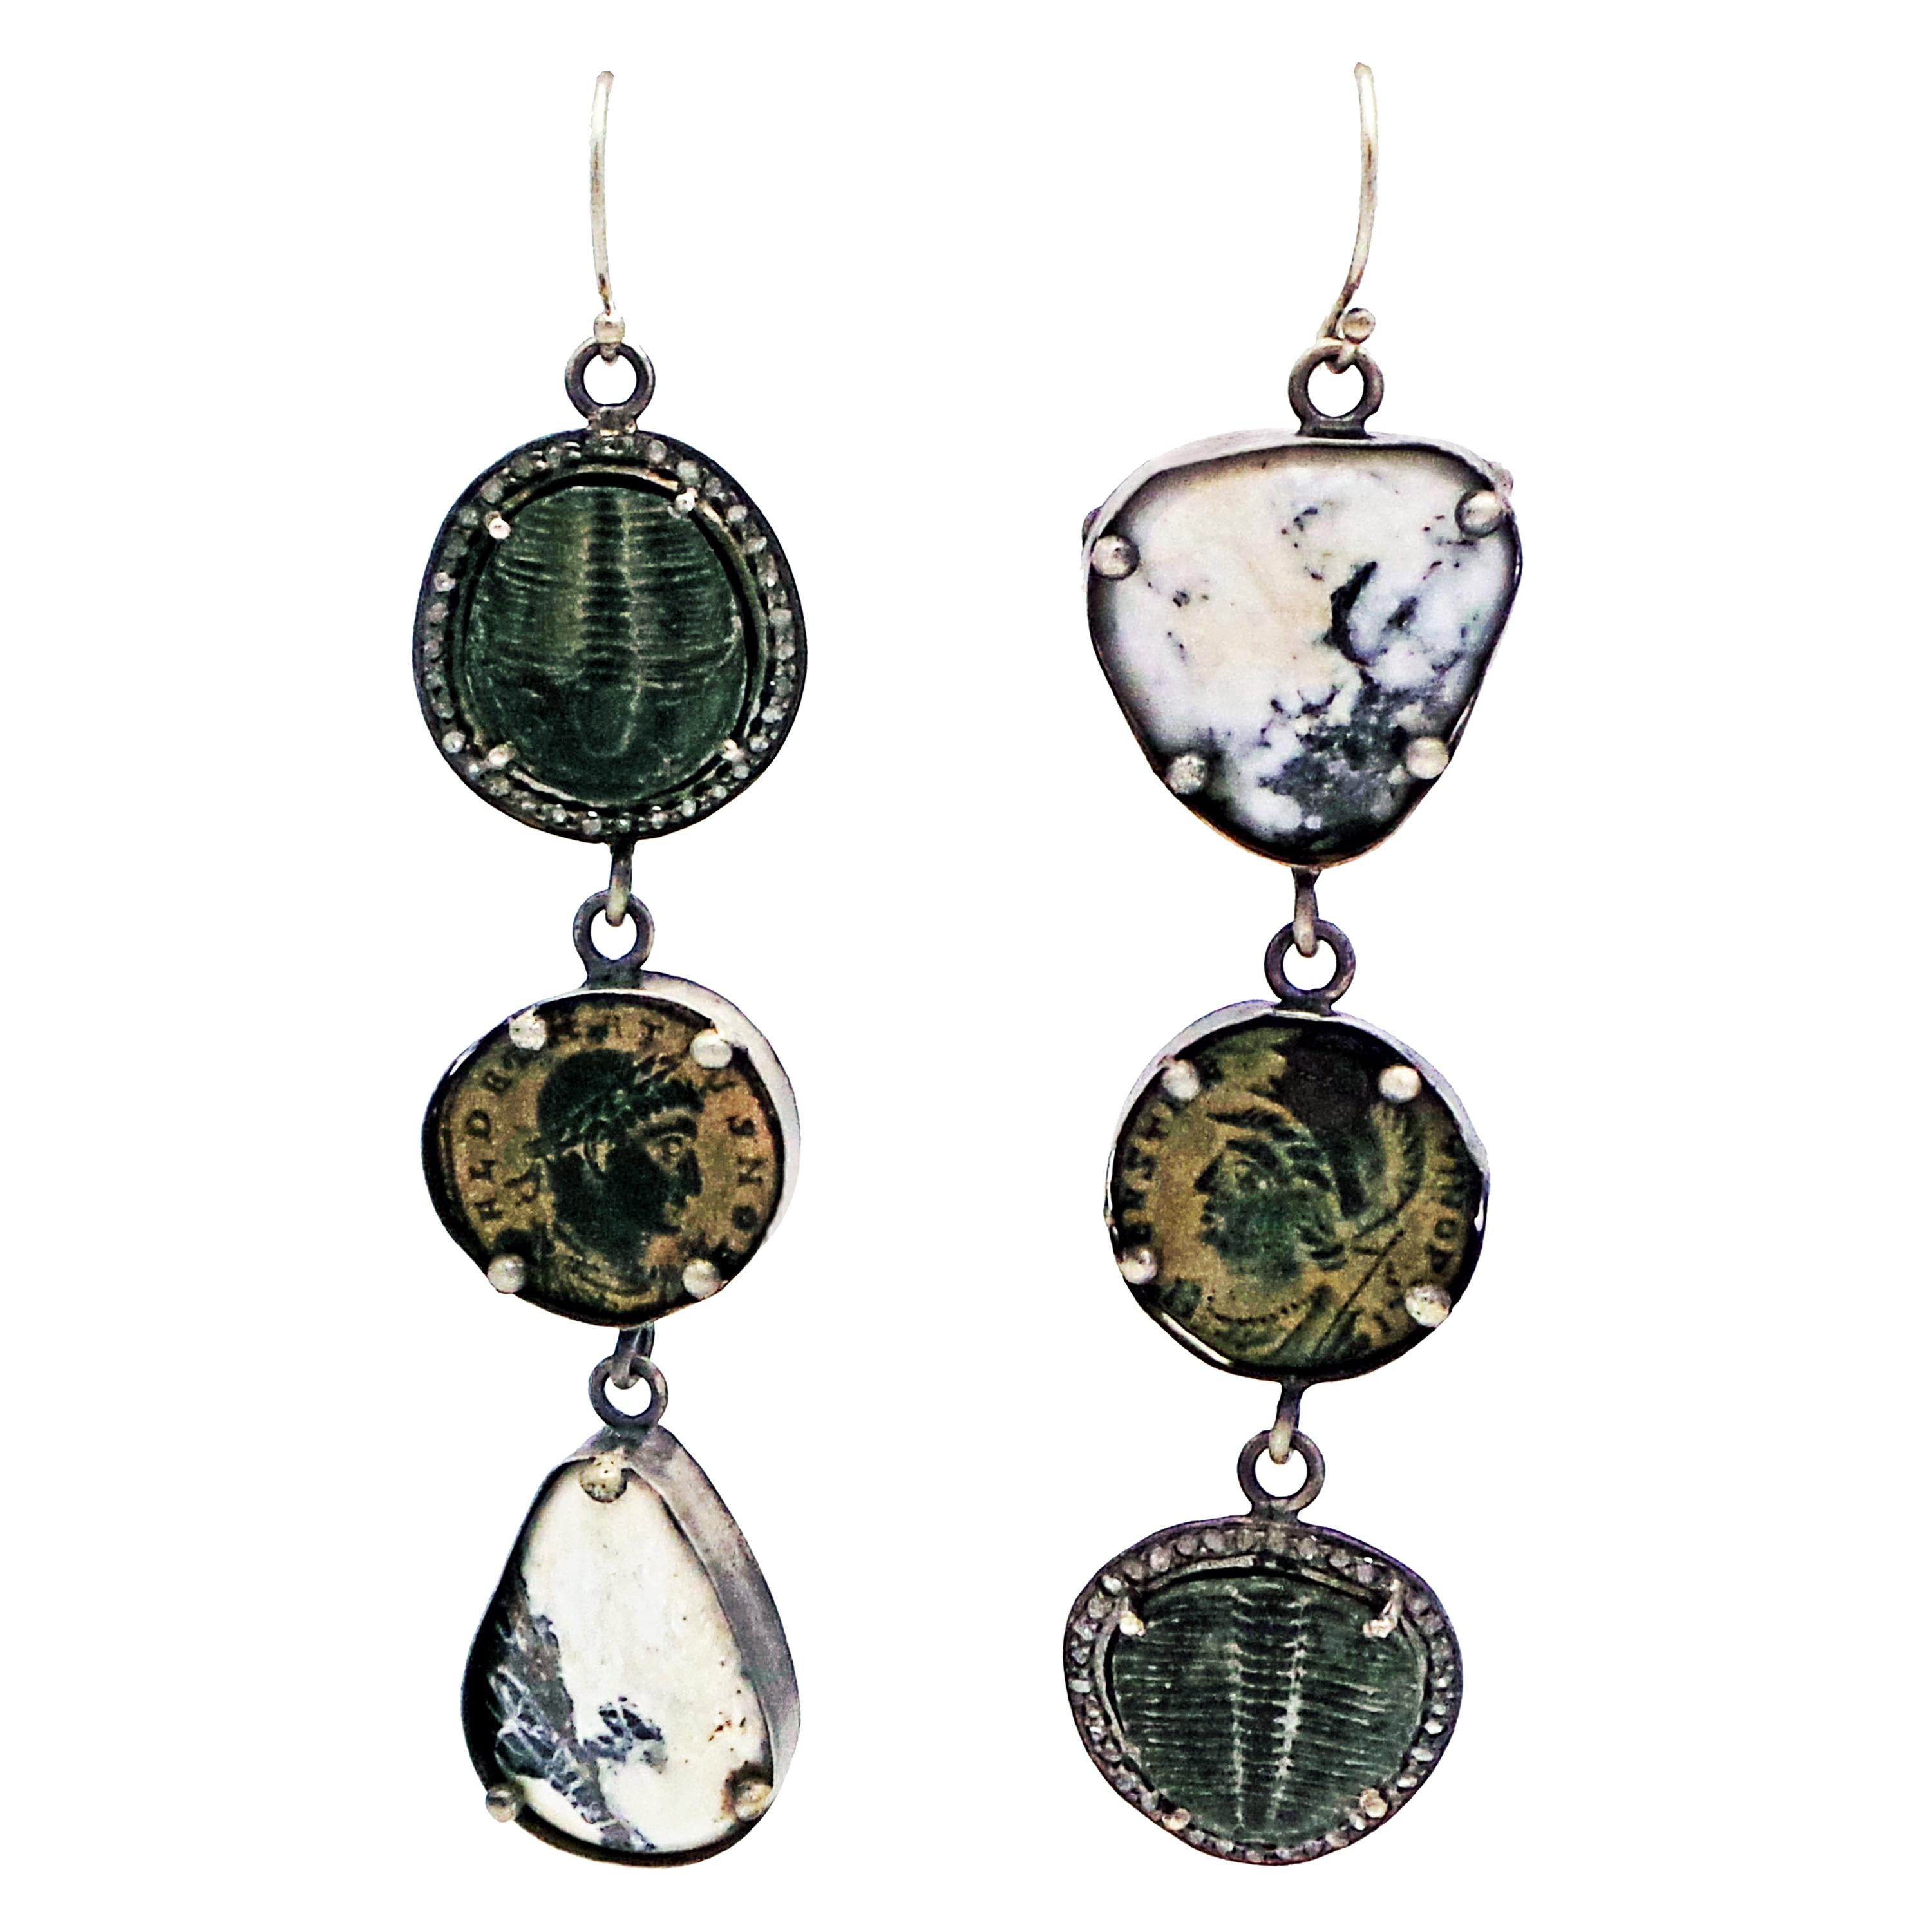 White Buffalo Turquoise, Trilobite Fossil and Ancient Roman Coin Dangle Earrings